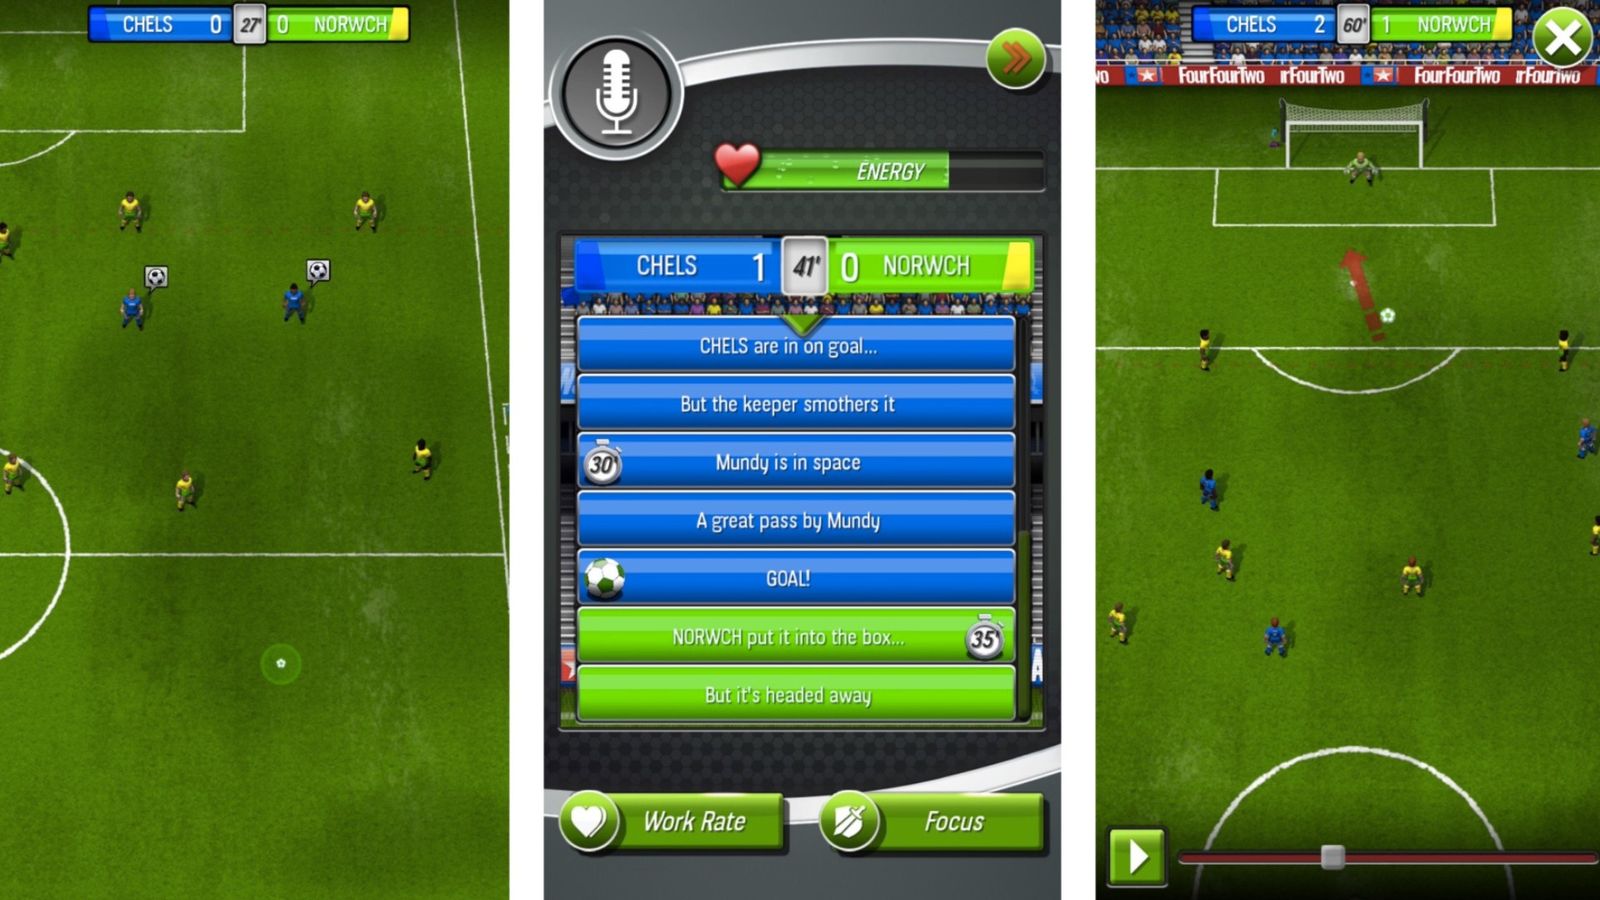 Image of a match in progress in New Star Soccer.